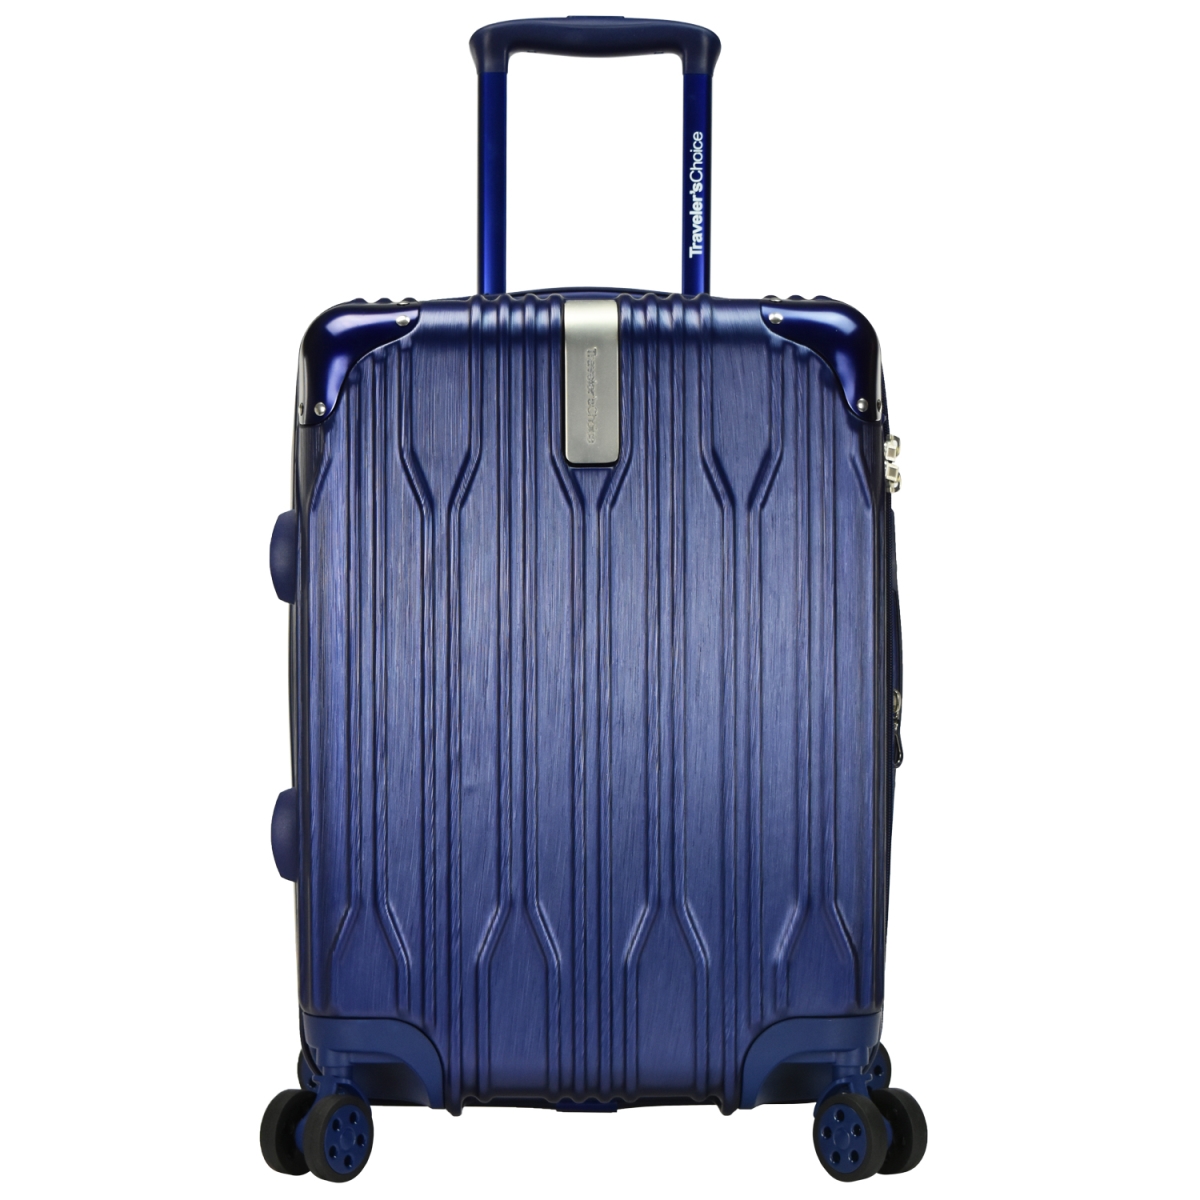 Travelers Choice Tc09035n20 Bell Weather Expandable 20 In. Spinner Luggage, Navy